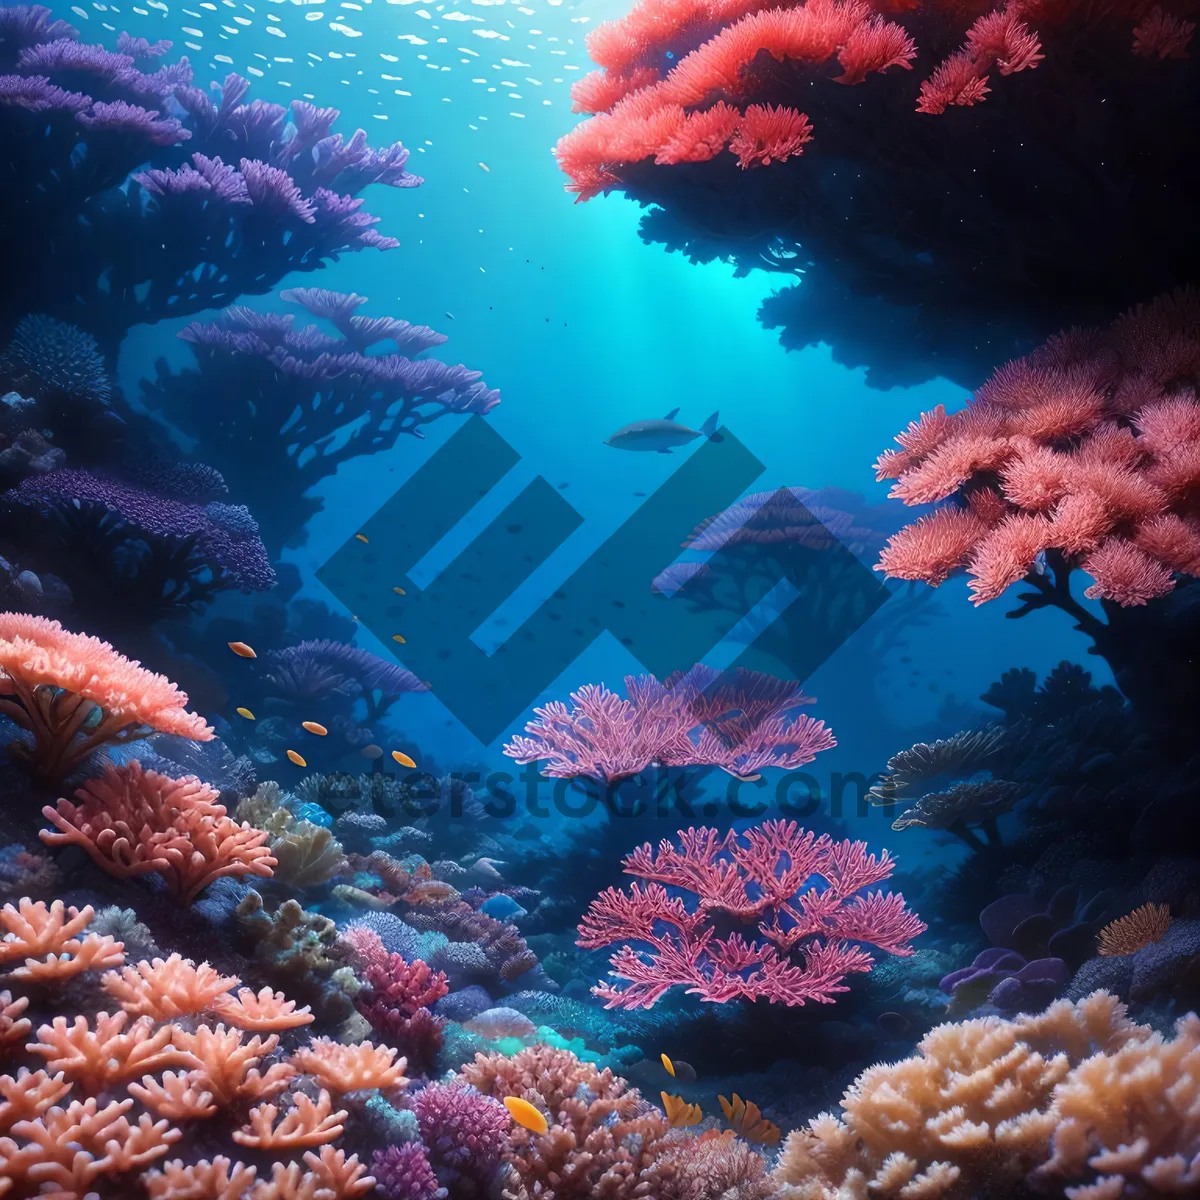 Picture of Vibrant Coral Reef Life Beneath Sunlit Waters